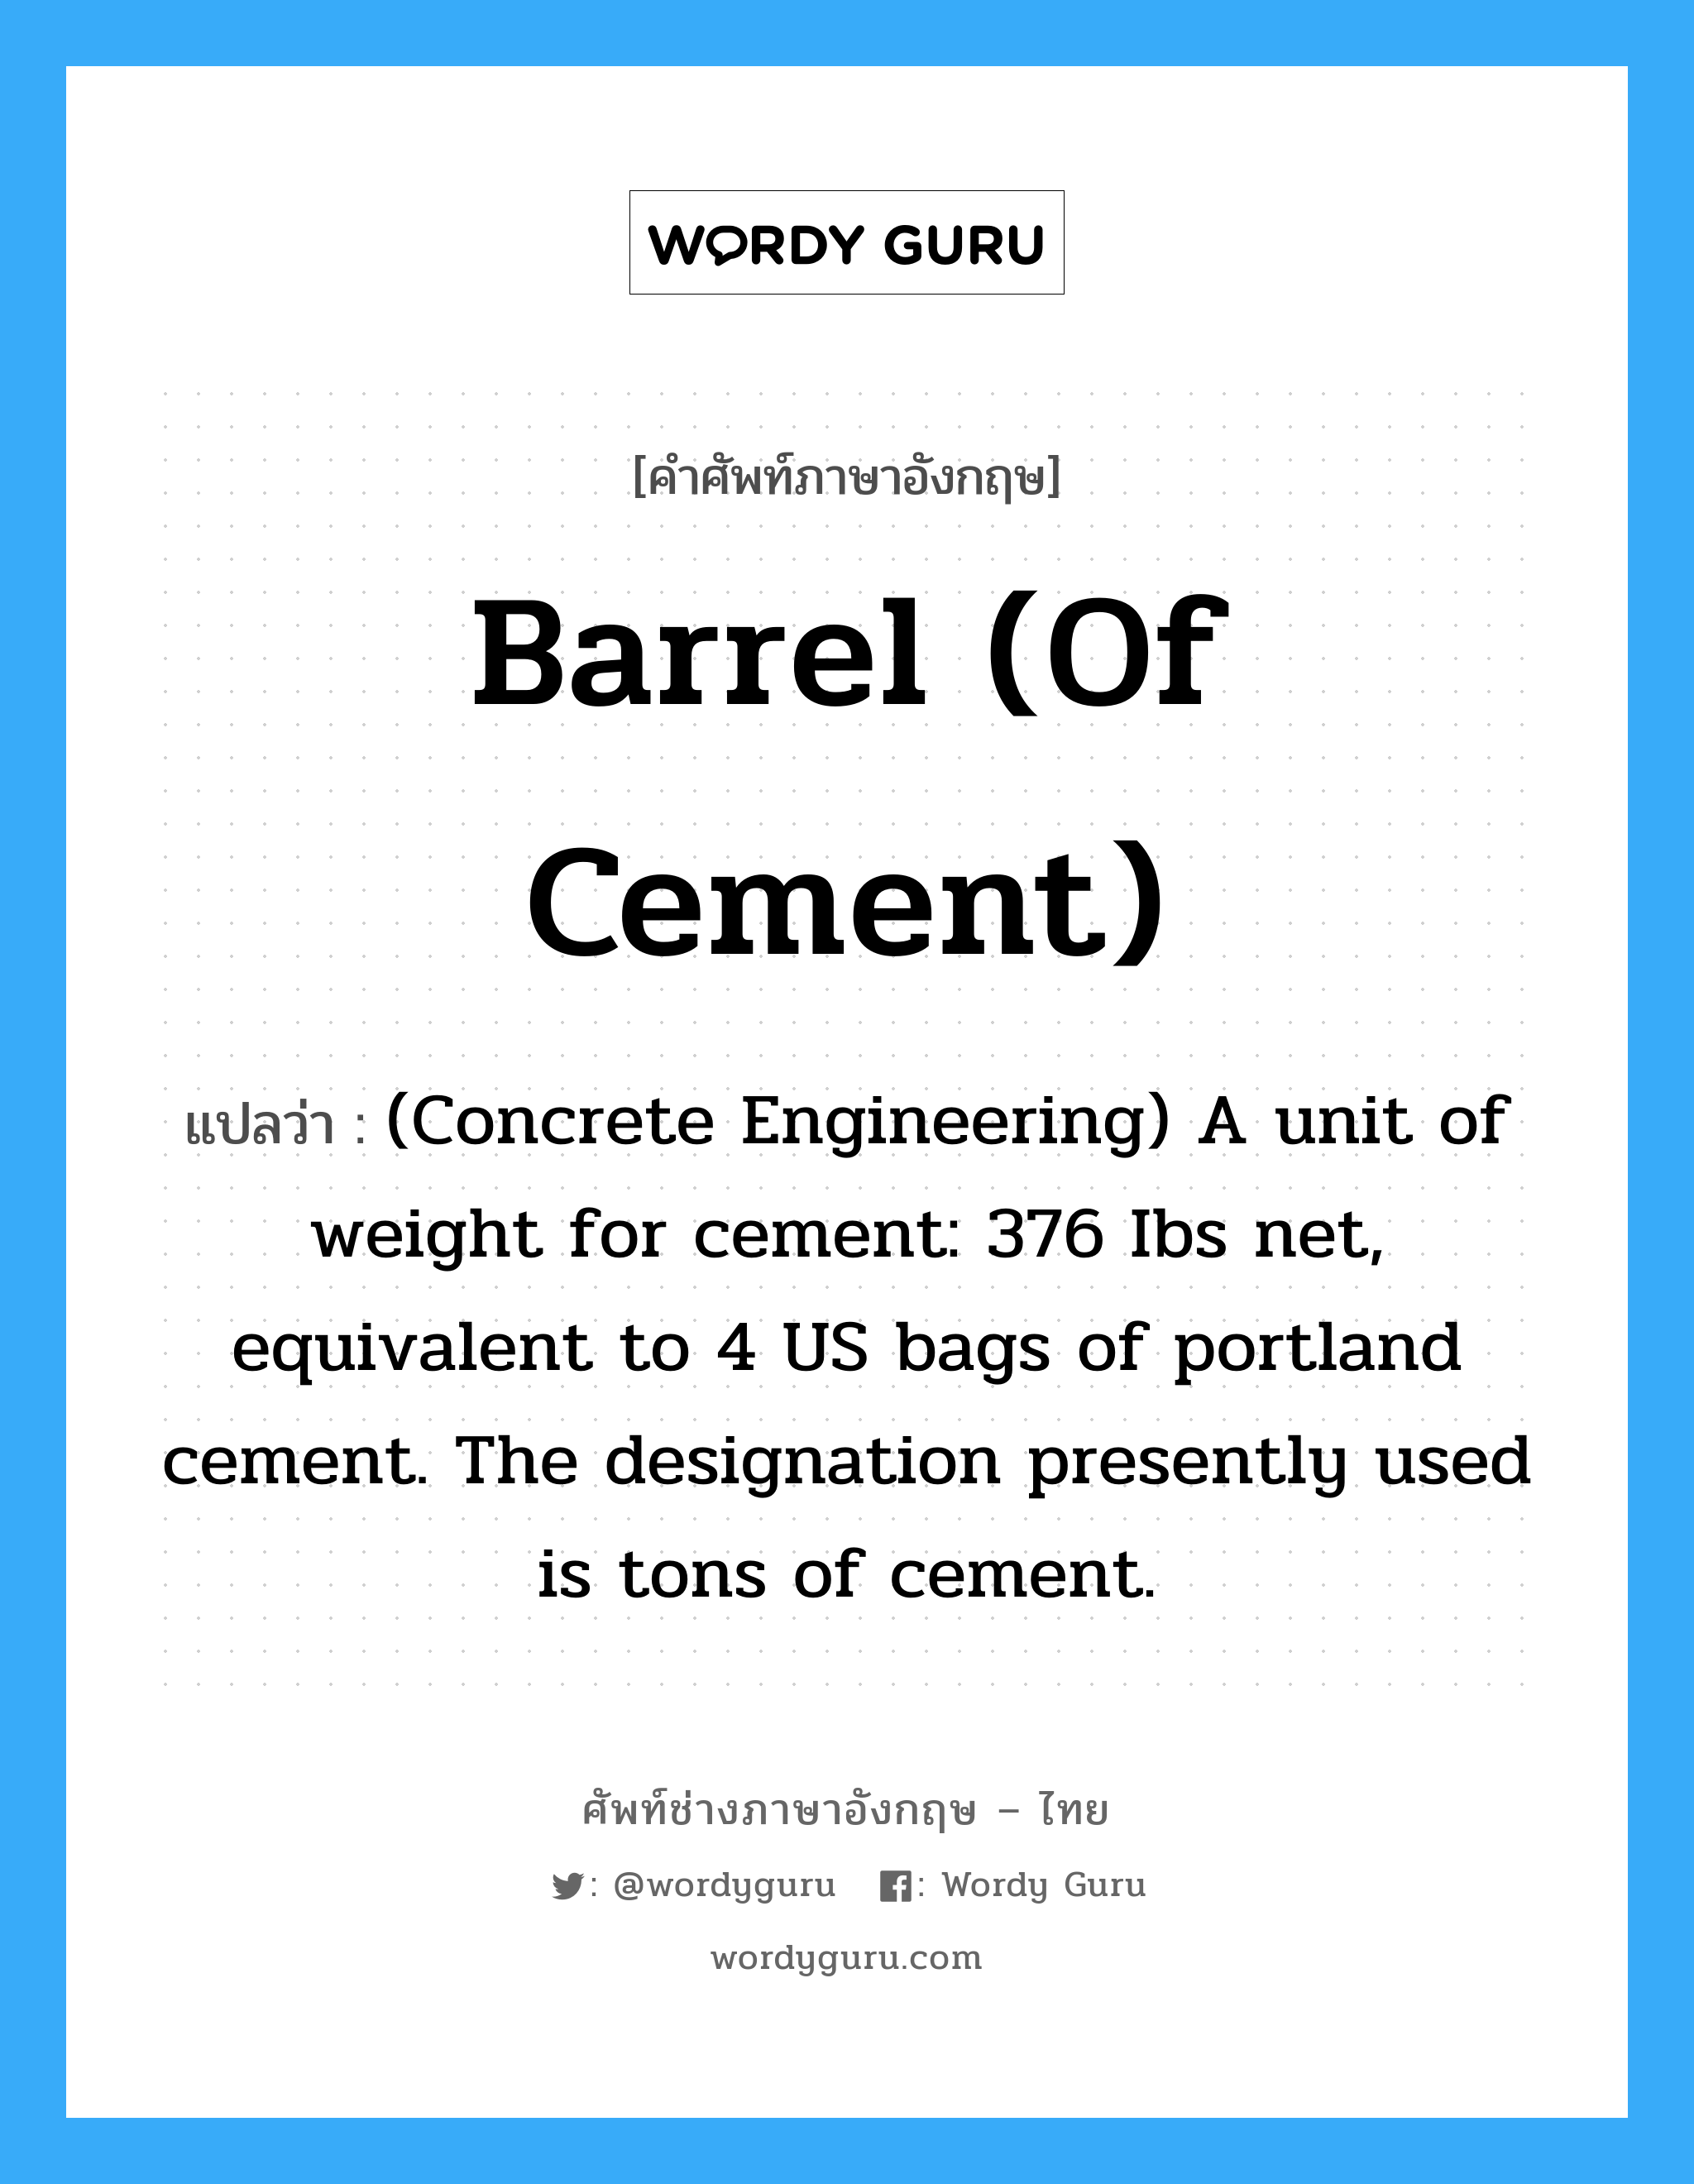 Barrel (of cement) แปลว่า?, คำศัพท์ช่างภาษาอังกฤษ - ไทย Barrel (of cement) คำศัพท์ภาษาอังกฤษ Barrel (of cement) แปลว่า (Concrete Engineering) A unit of weight for cement: 376 Ibs net, equivalent to 4 US bags of portland cement. The designation presently used is tons of cement.